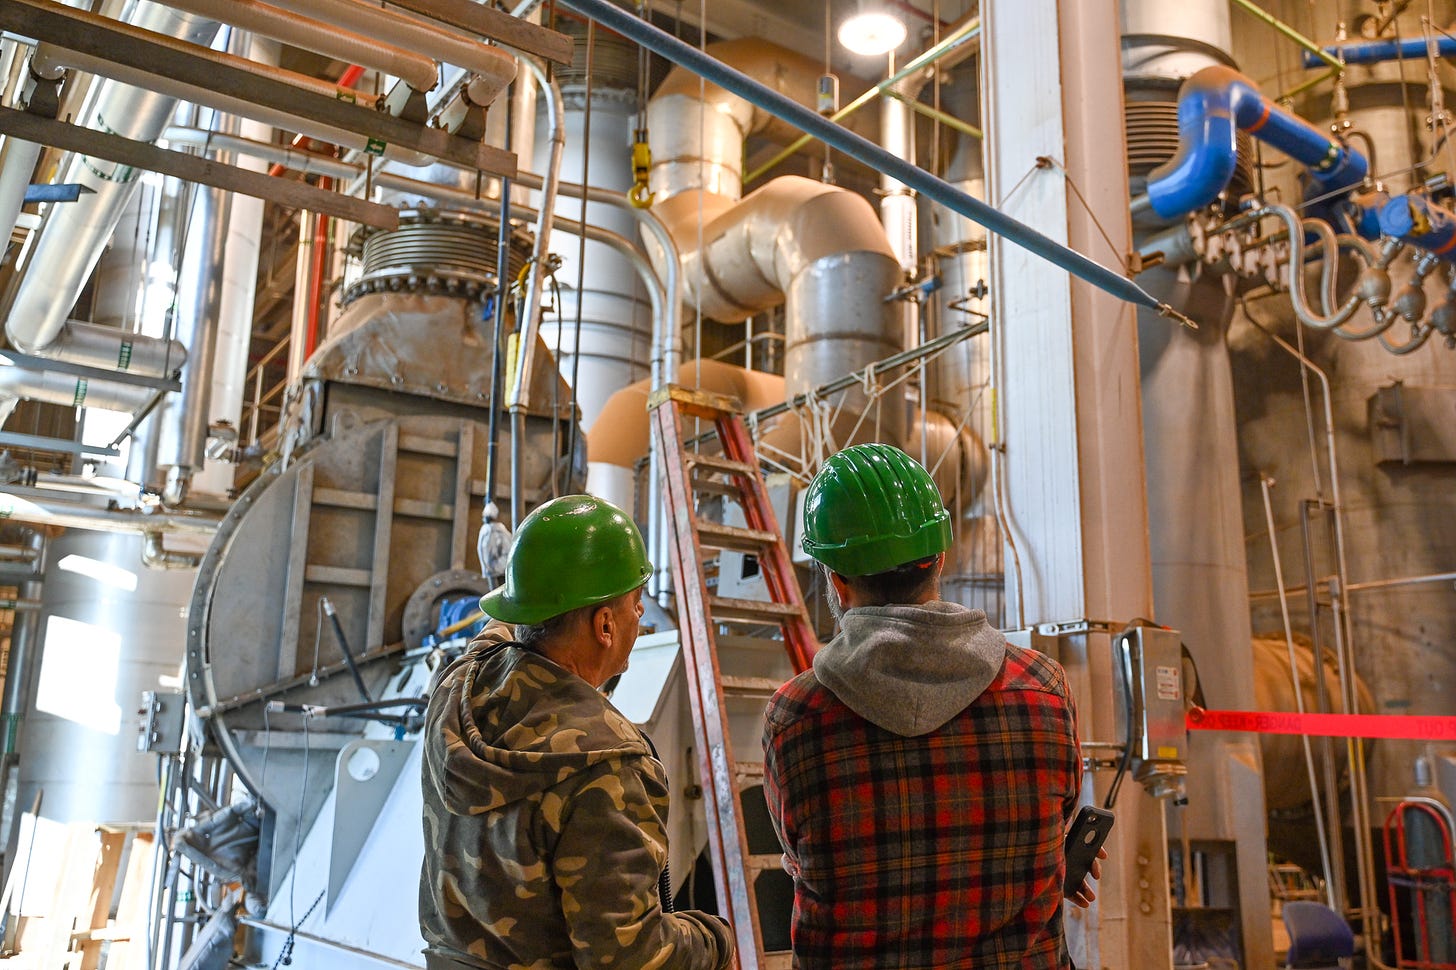 two men seen from behind in an industrial setting looking at a large piece of equipment. both men wear warm layers and hard hats. the man on the left observes and looks ahead while the man on the right points towards the equipment as if explaining its operation.